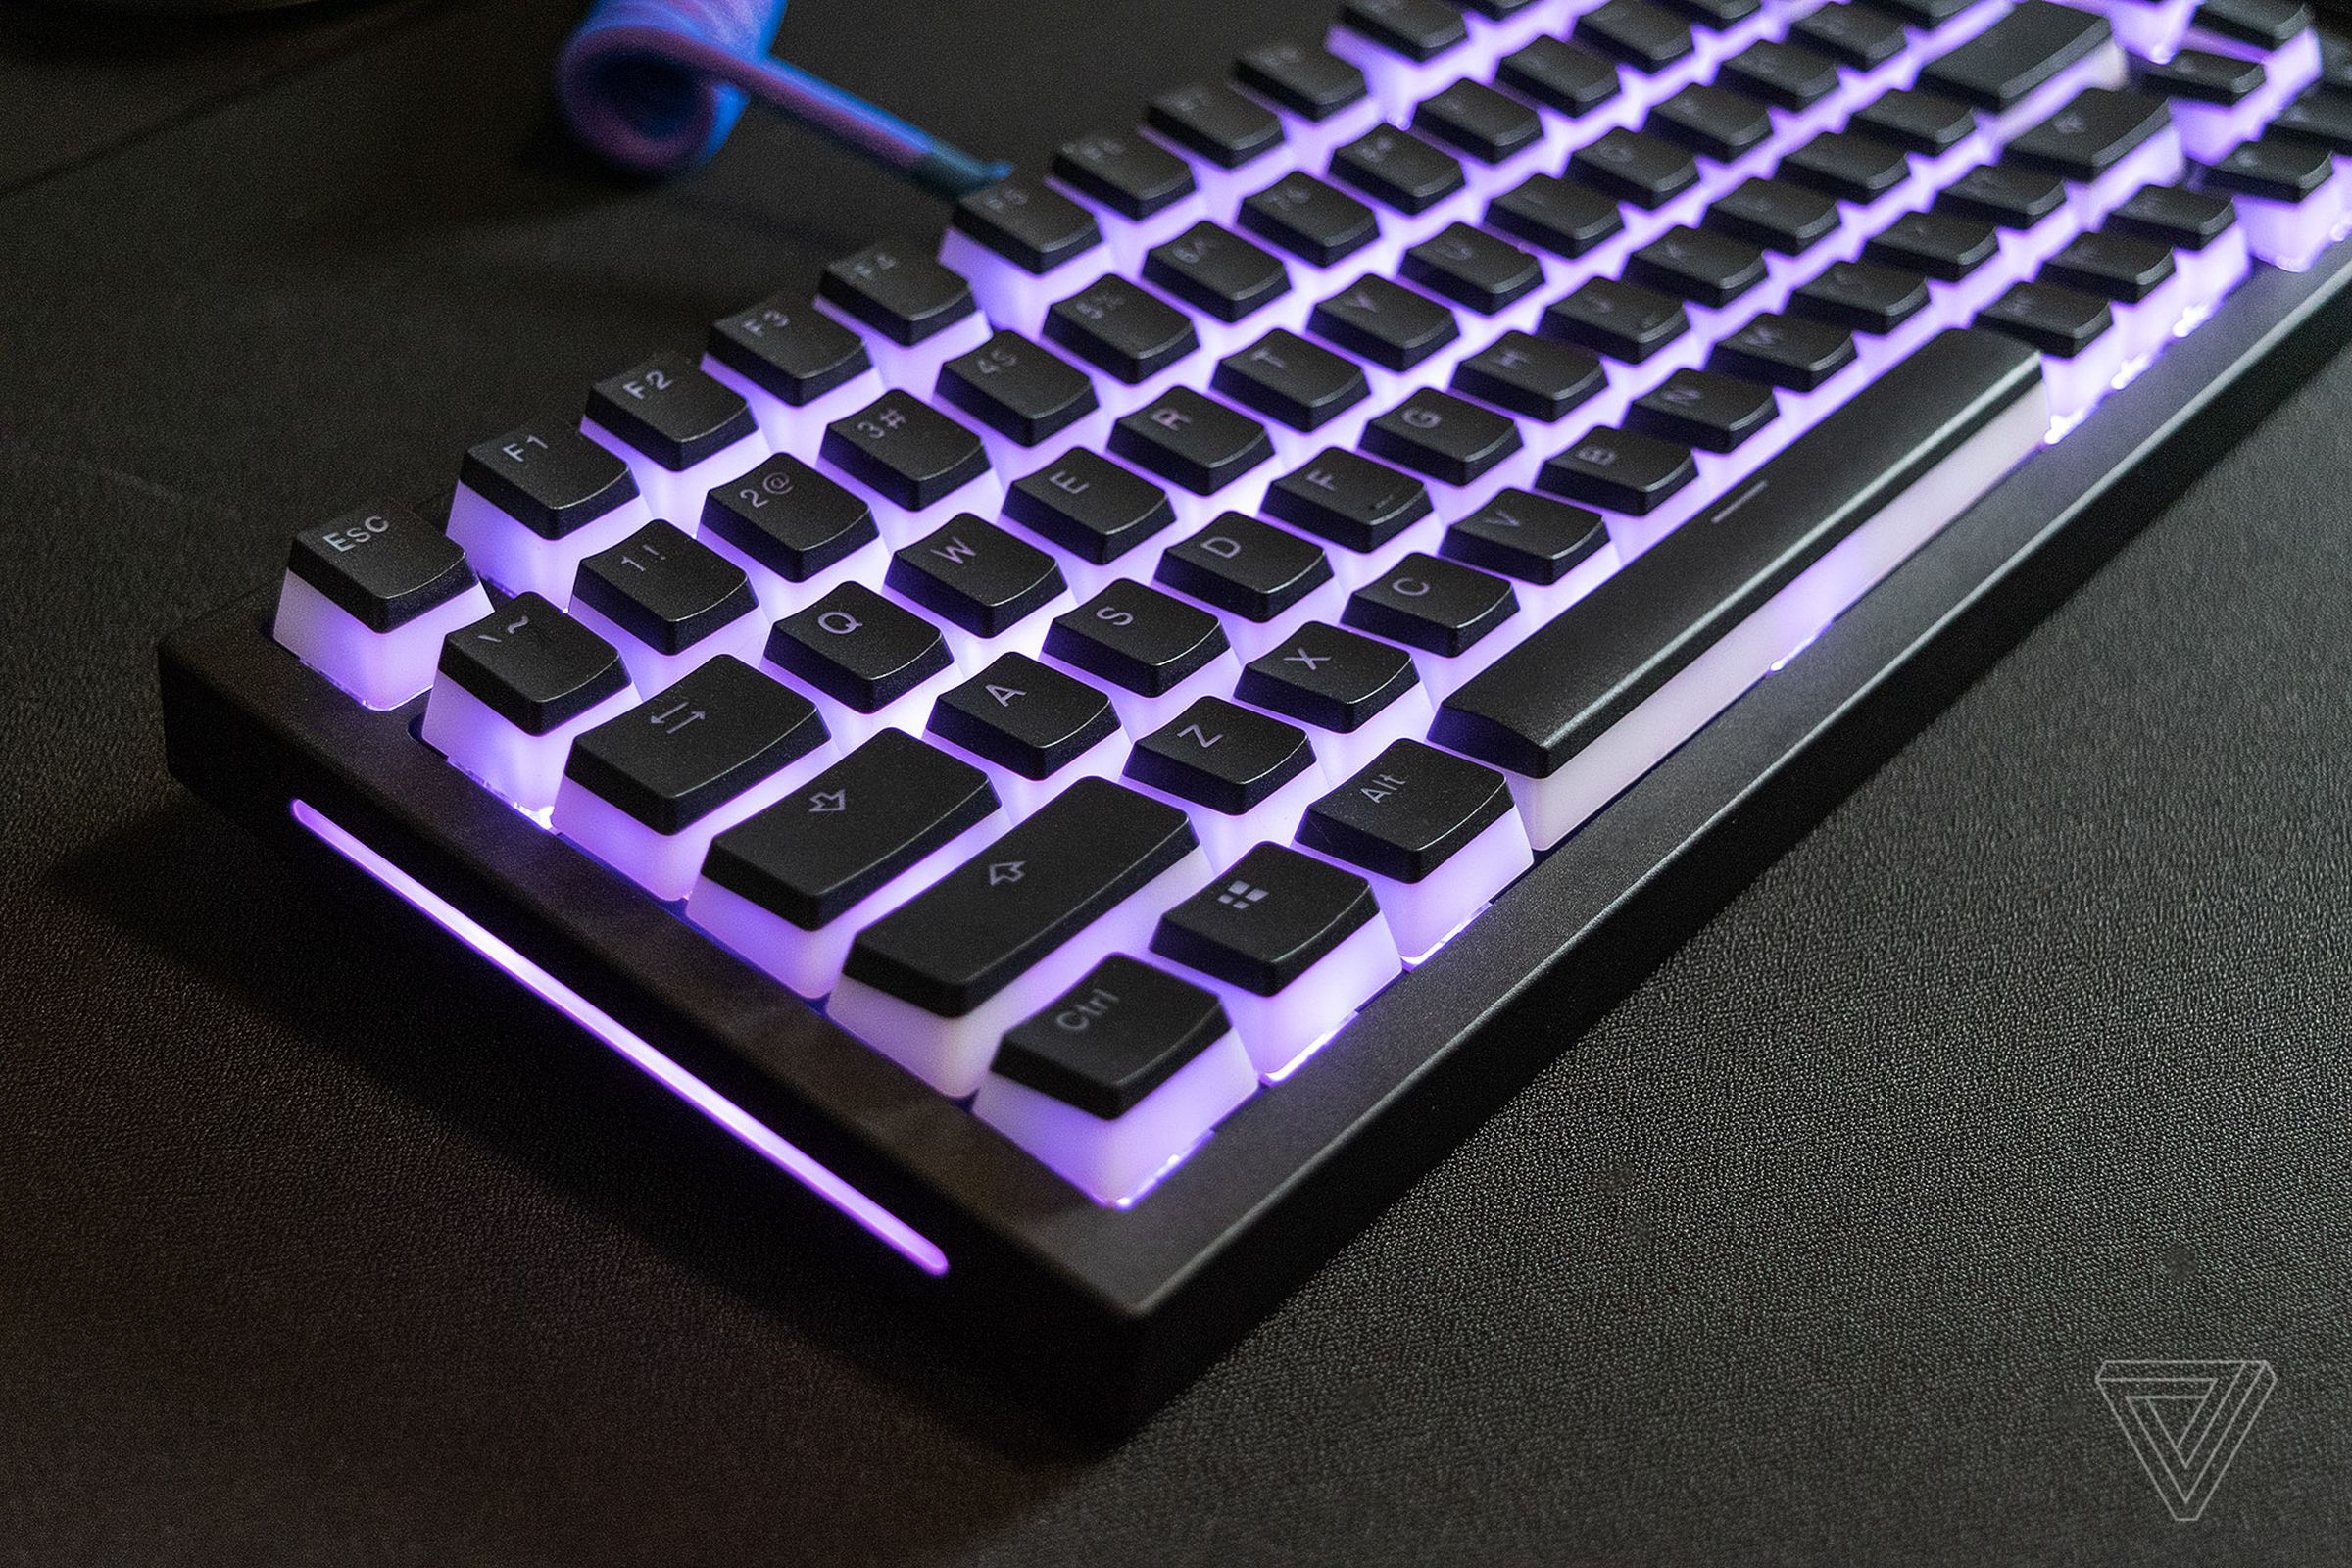 That’s one good-looking keyboard.